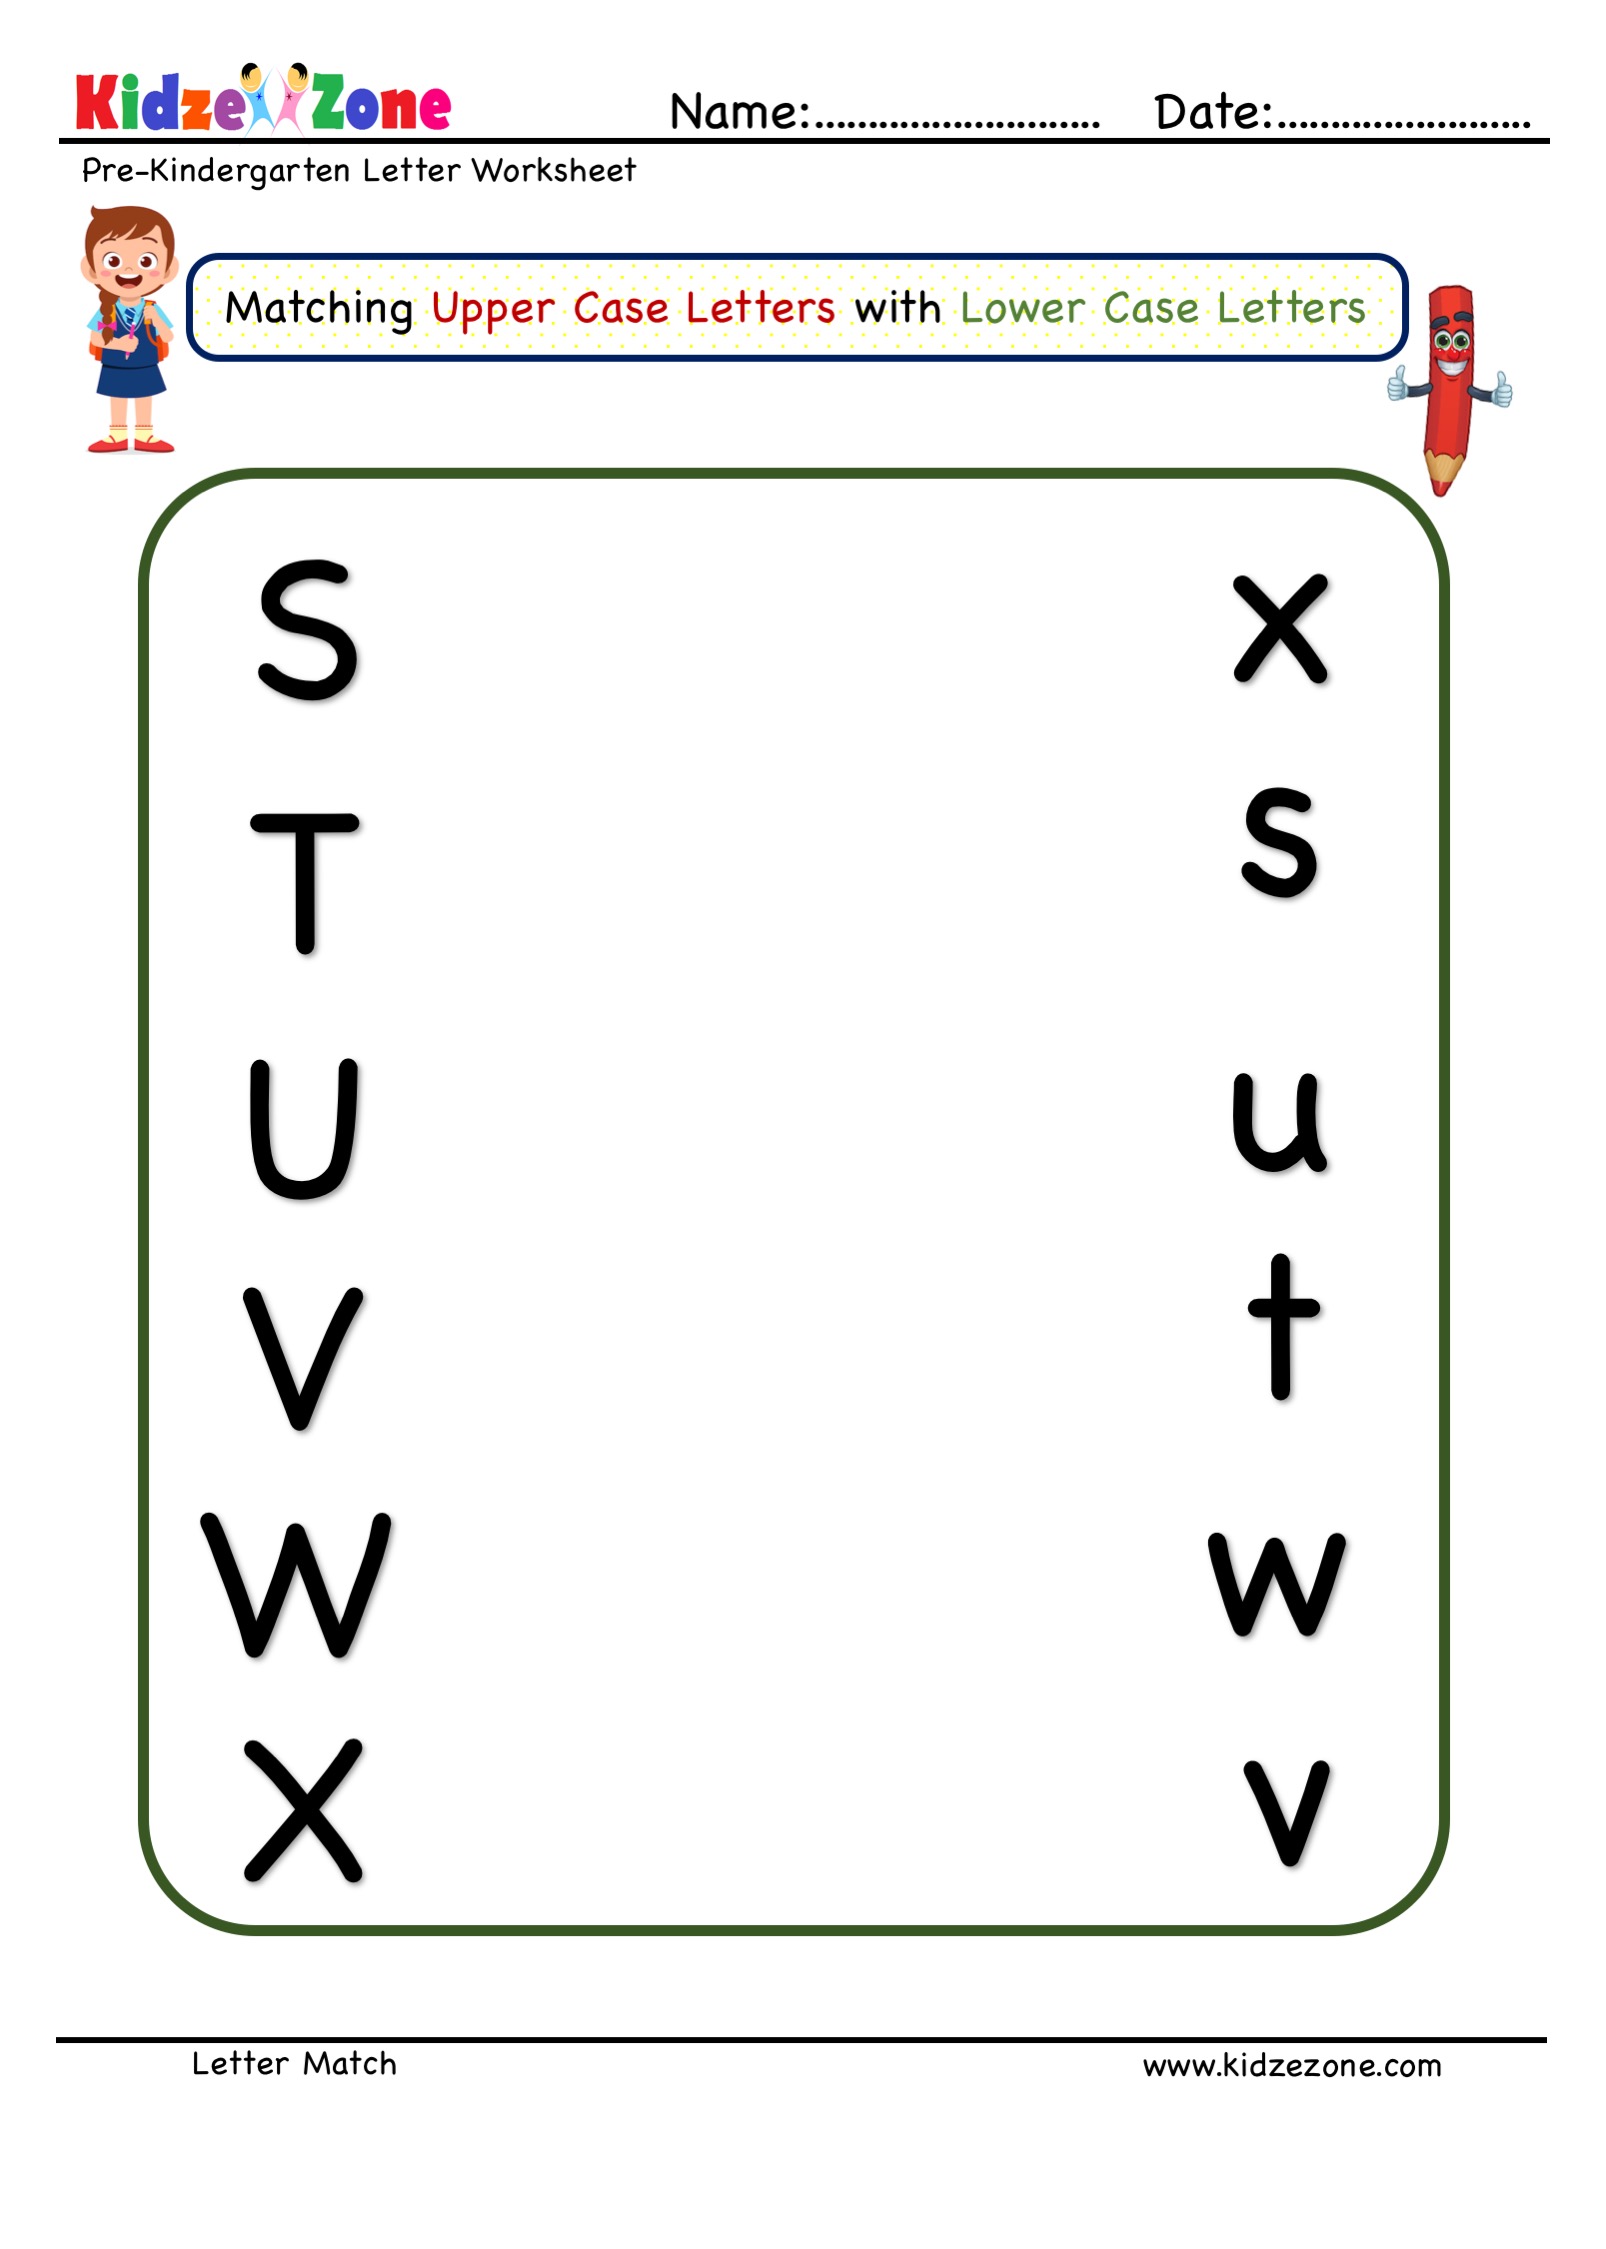 preschool-letter-matching-worksheet-upper-case-to-lower-case-s-to-x